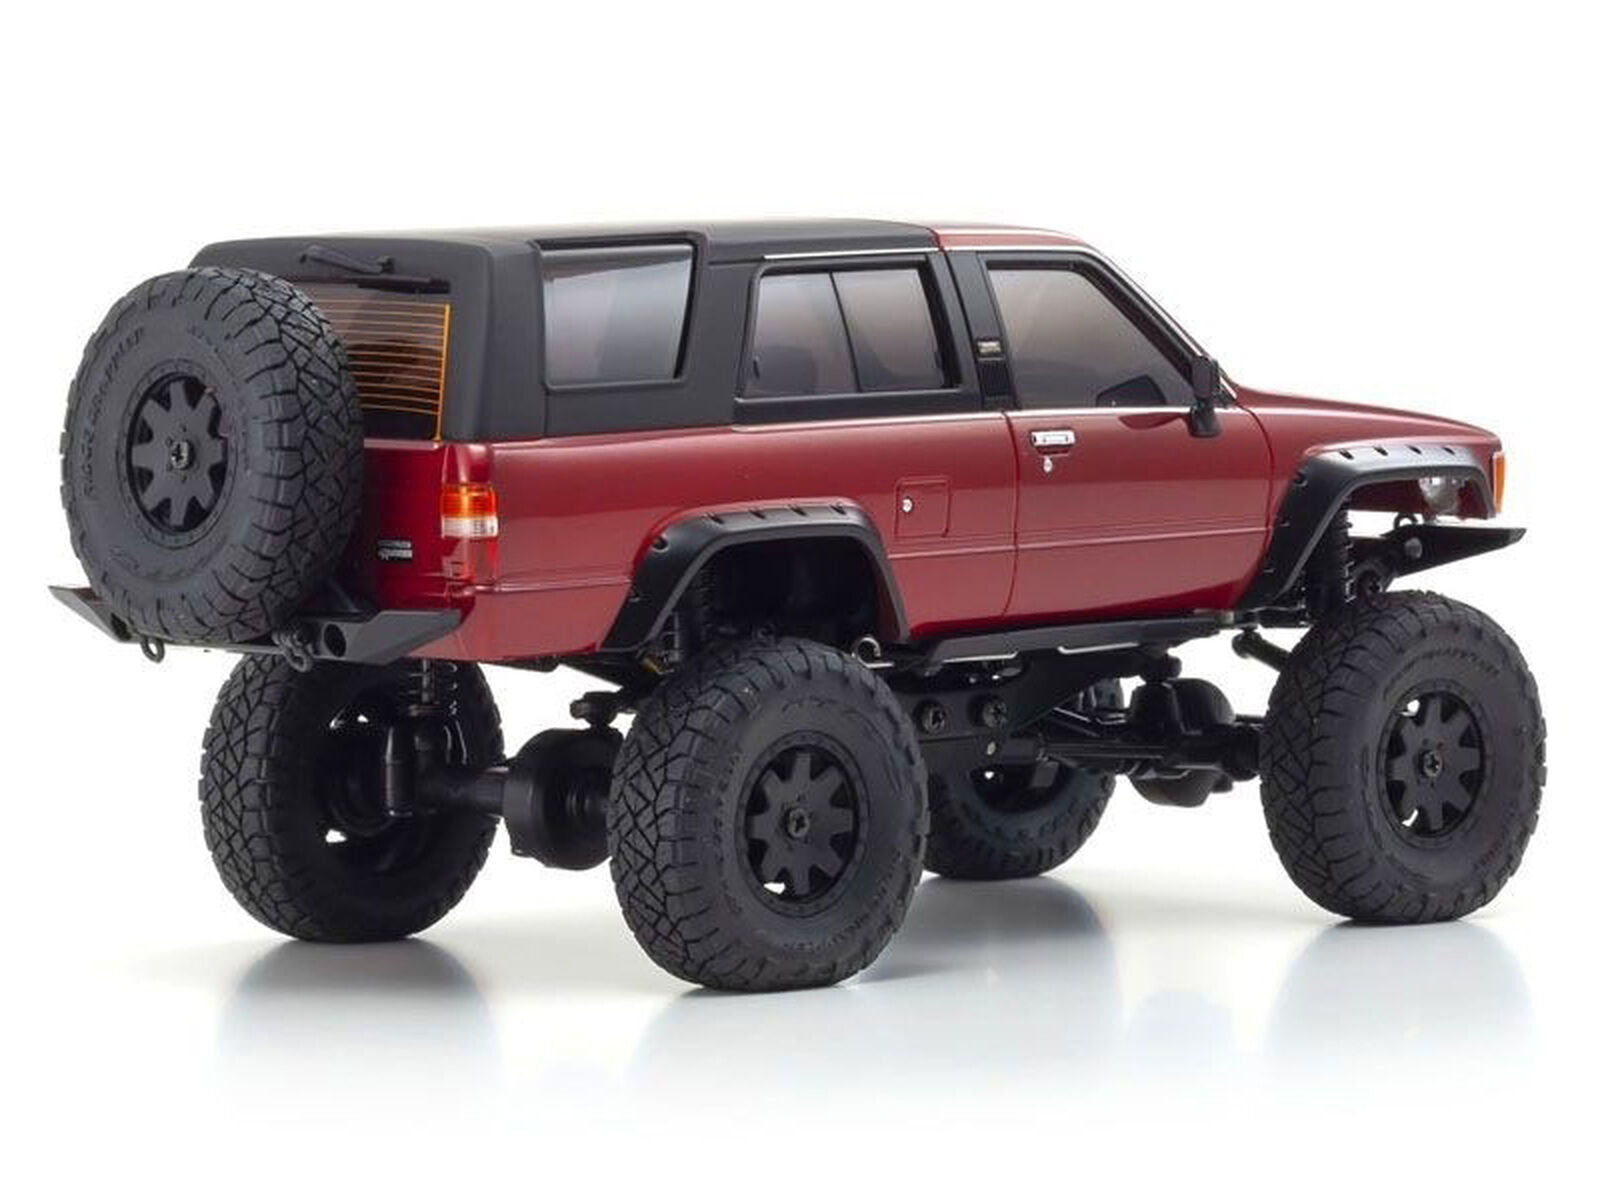 *DISCONTINUED* NMini-Z 4X4 Toyota 4 Runner (HiLux Surf), Metallic Red, Ready Set